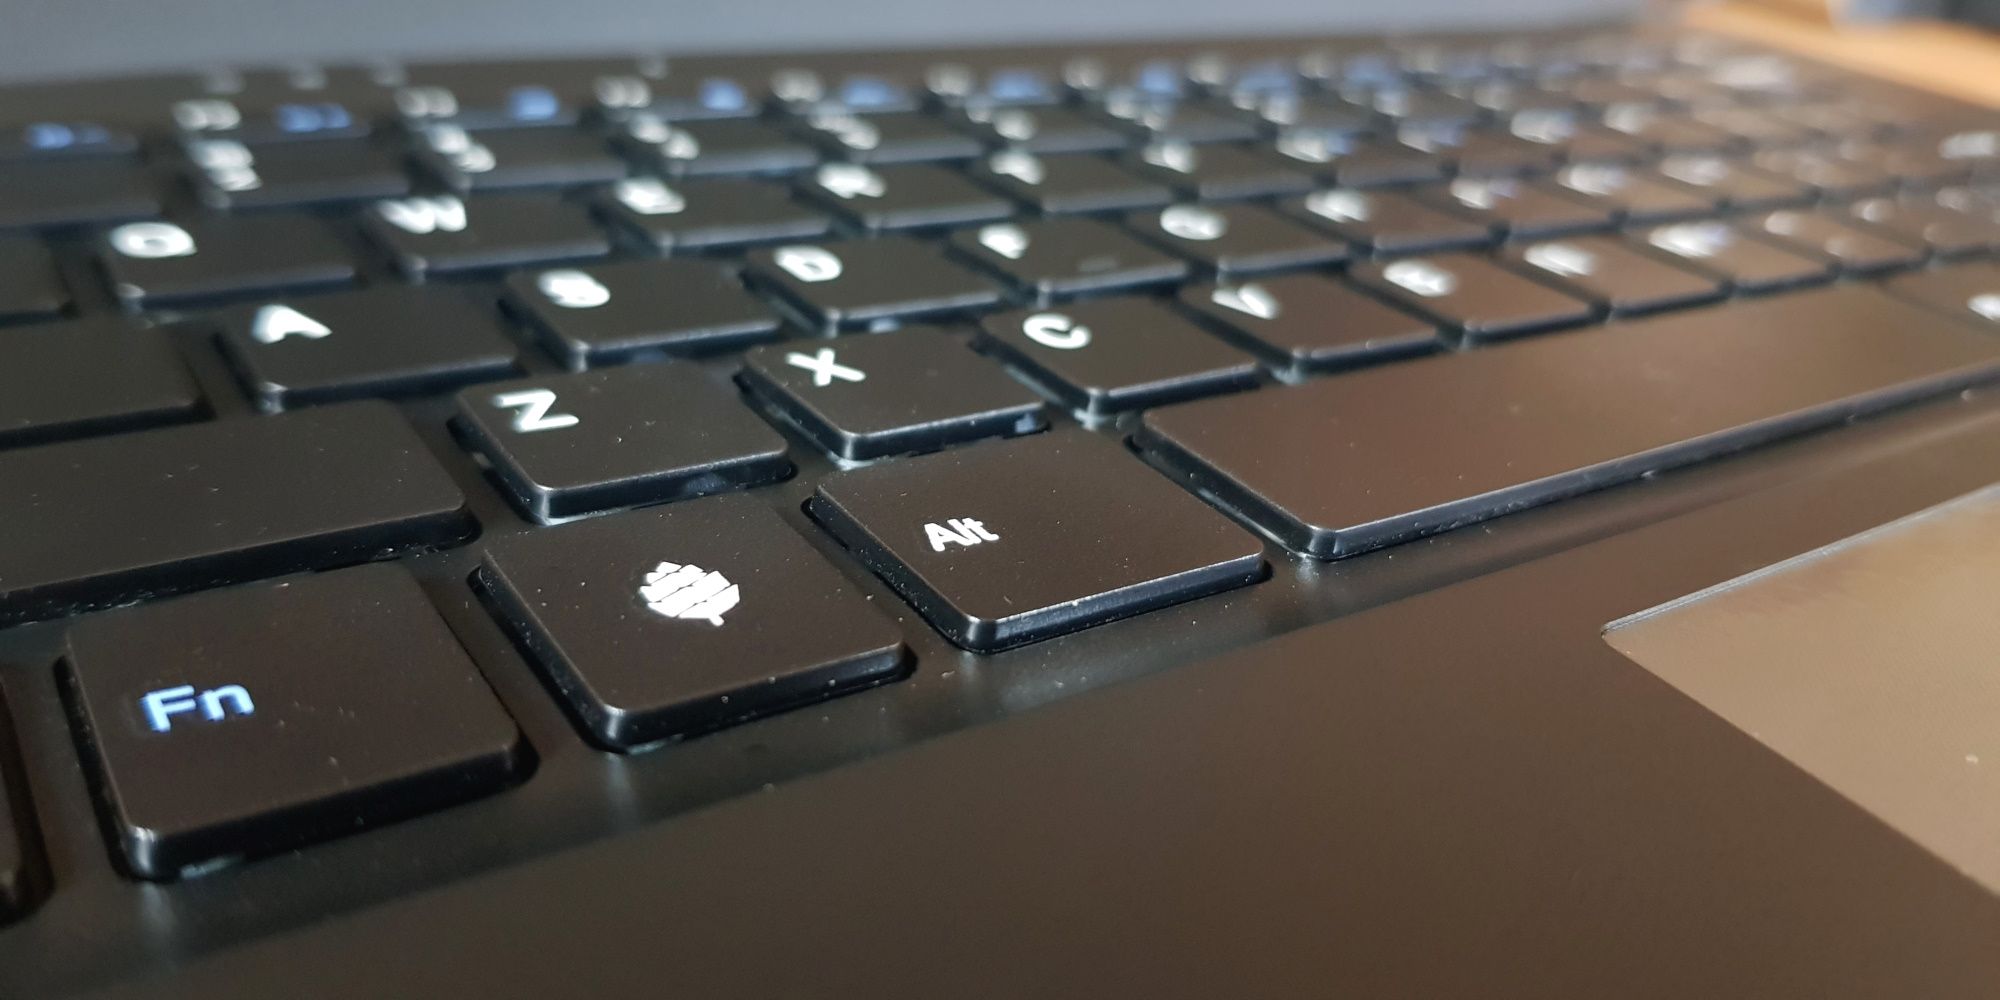 pinebook pro super button with pine64 logo